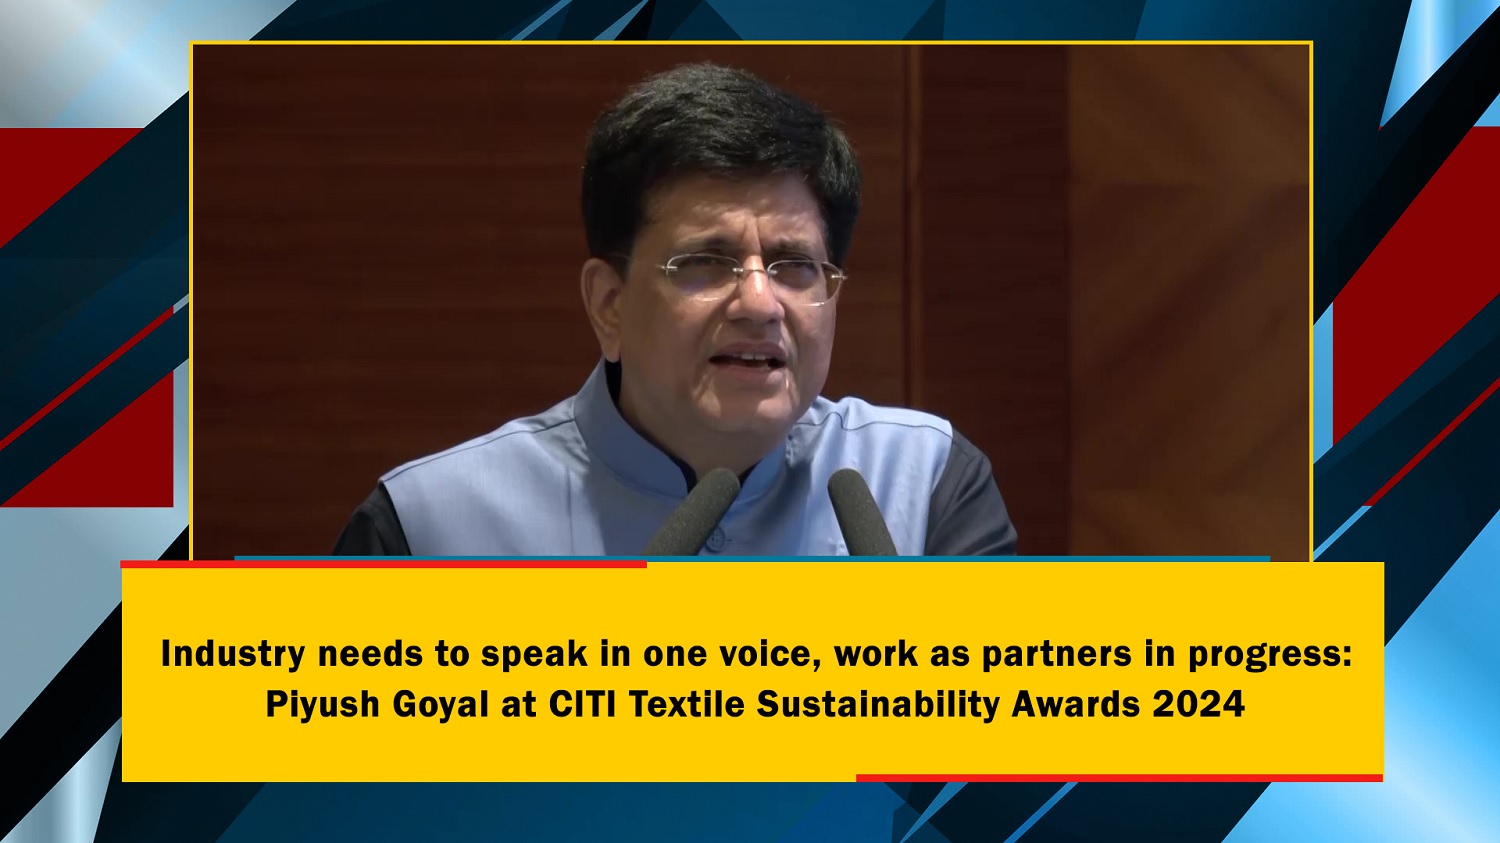 Industry needs to speak in one voice, work as partners in progress: Piyush Goyal at CITI Textile Sustainability Awards 2024